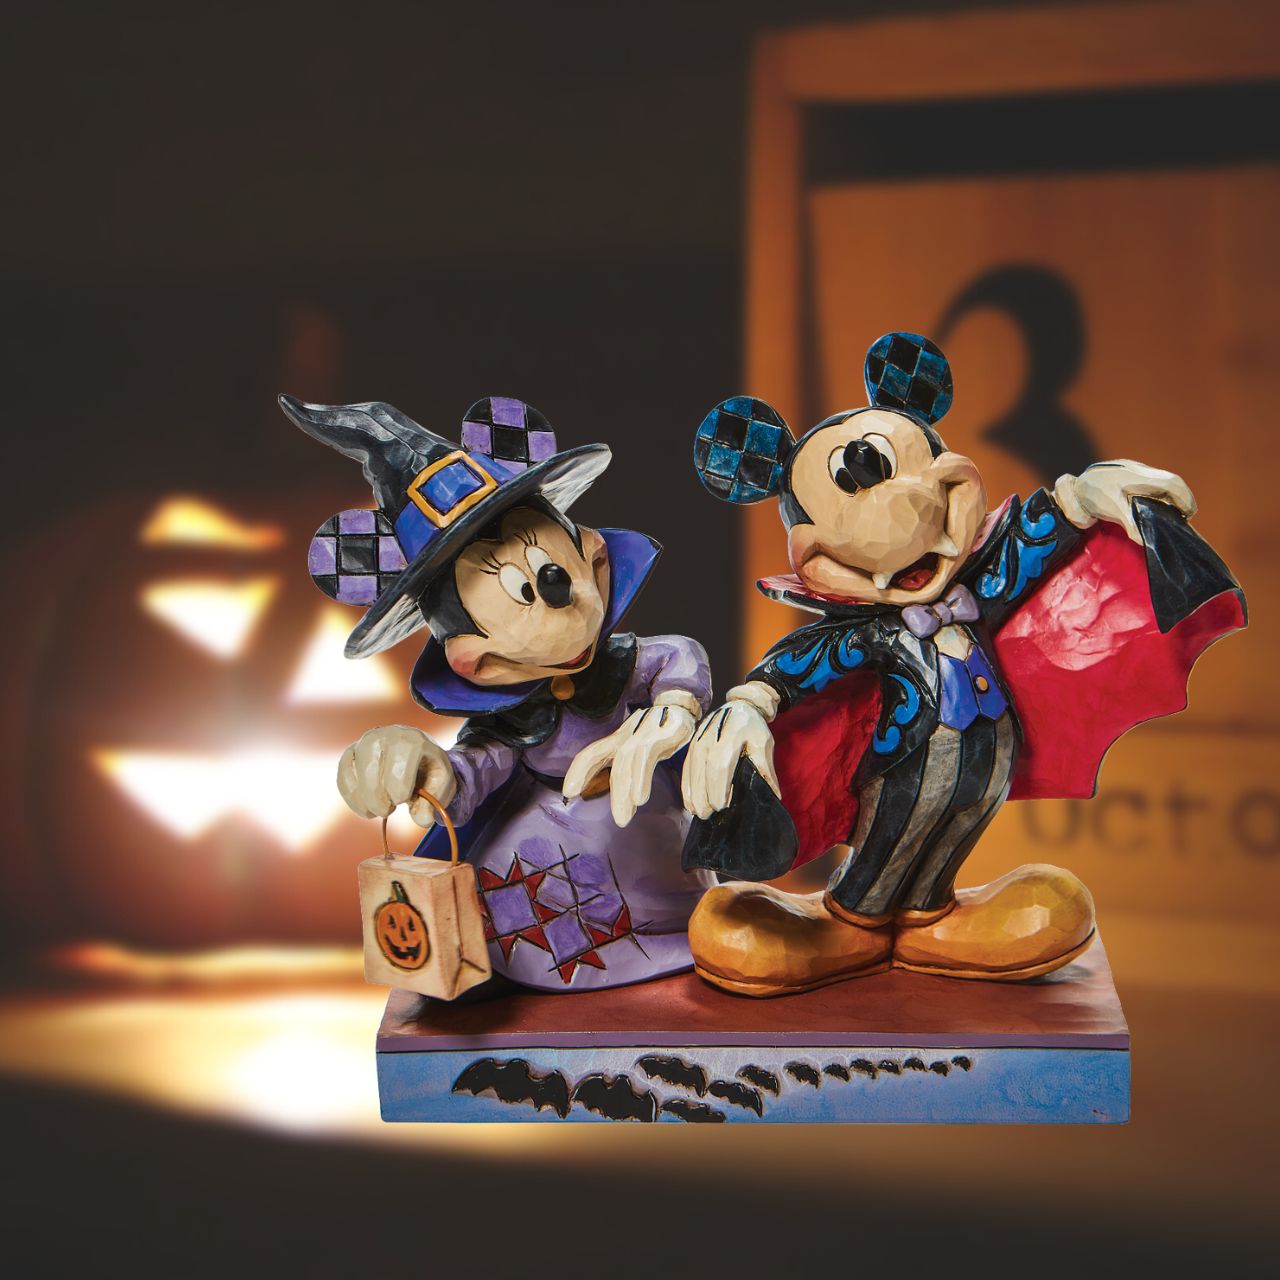 Disney Terrifying Trick-or-Treaters - Mickey and Minnie as a Vampires  This delightful double figurine is the perfect gift for any Disney fan this Halloween. Seeing a mouse might make you jump, but two in costume will make you smile in this Jim Shore design. Mickey and Minnie don some spooky suits for the sake of Halloween.